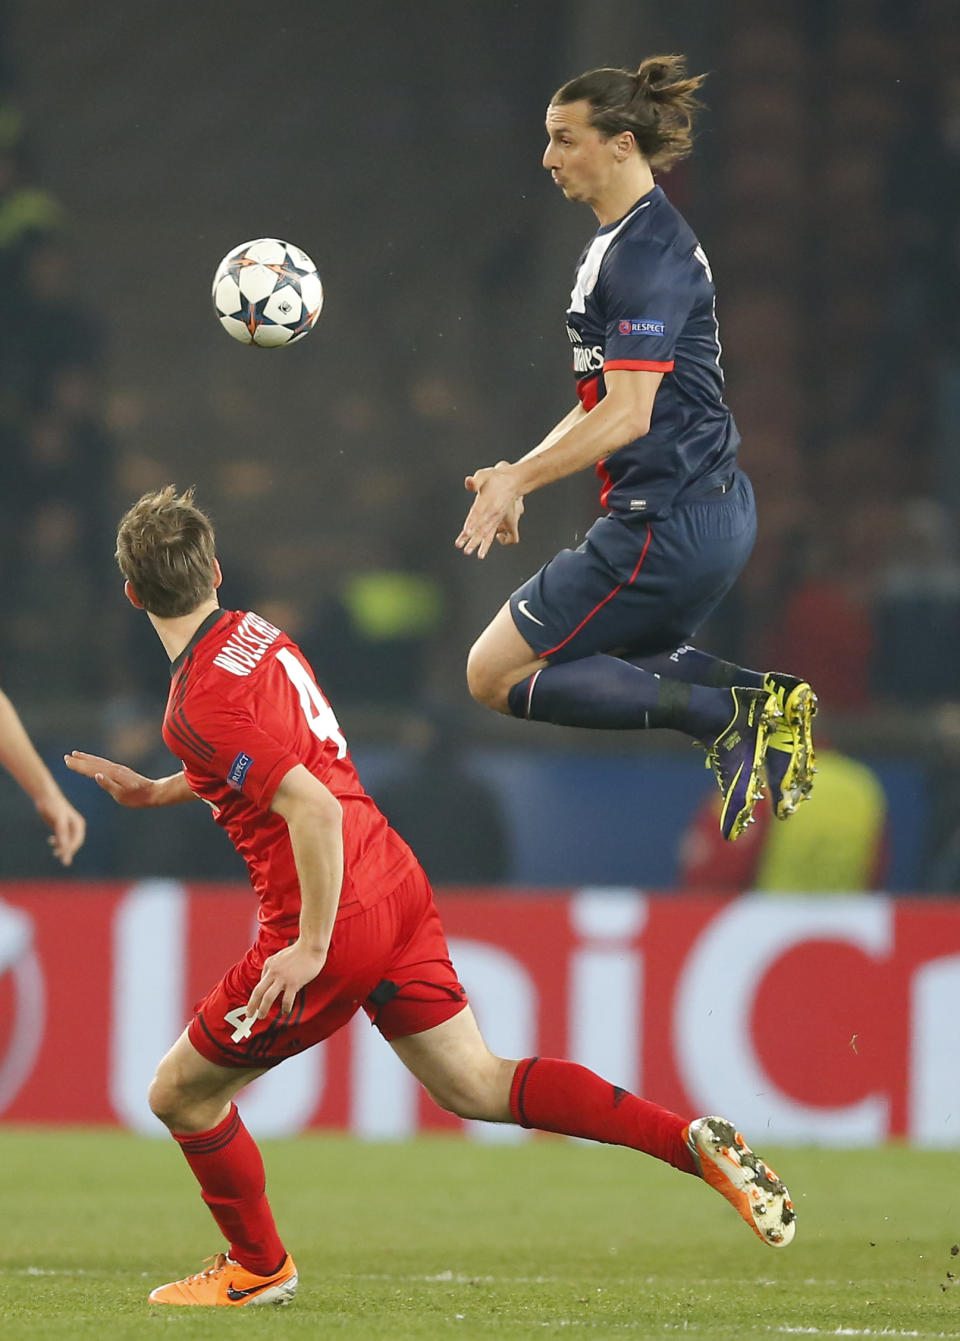 PSG's Zlatan Ibrahimovic, right, jumps in the air for a high ball while Leverkusen's Philipp Wollscheid, center, looks on during a Champions League last 16 second leg soccer match between Paris Saint Germain and Bayer Leverkusen at Parc des Princes stadium in Paris, Wednesday, March 12, 2014. (AP Photo/Michel Euler)